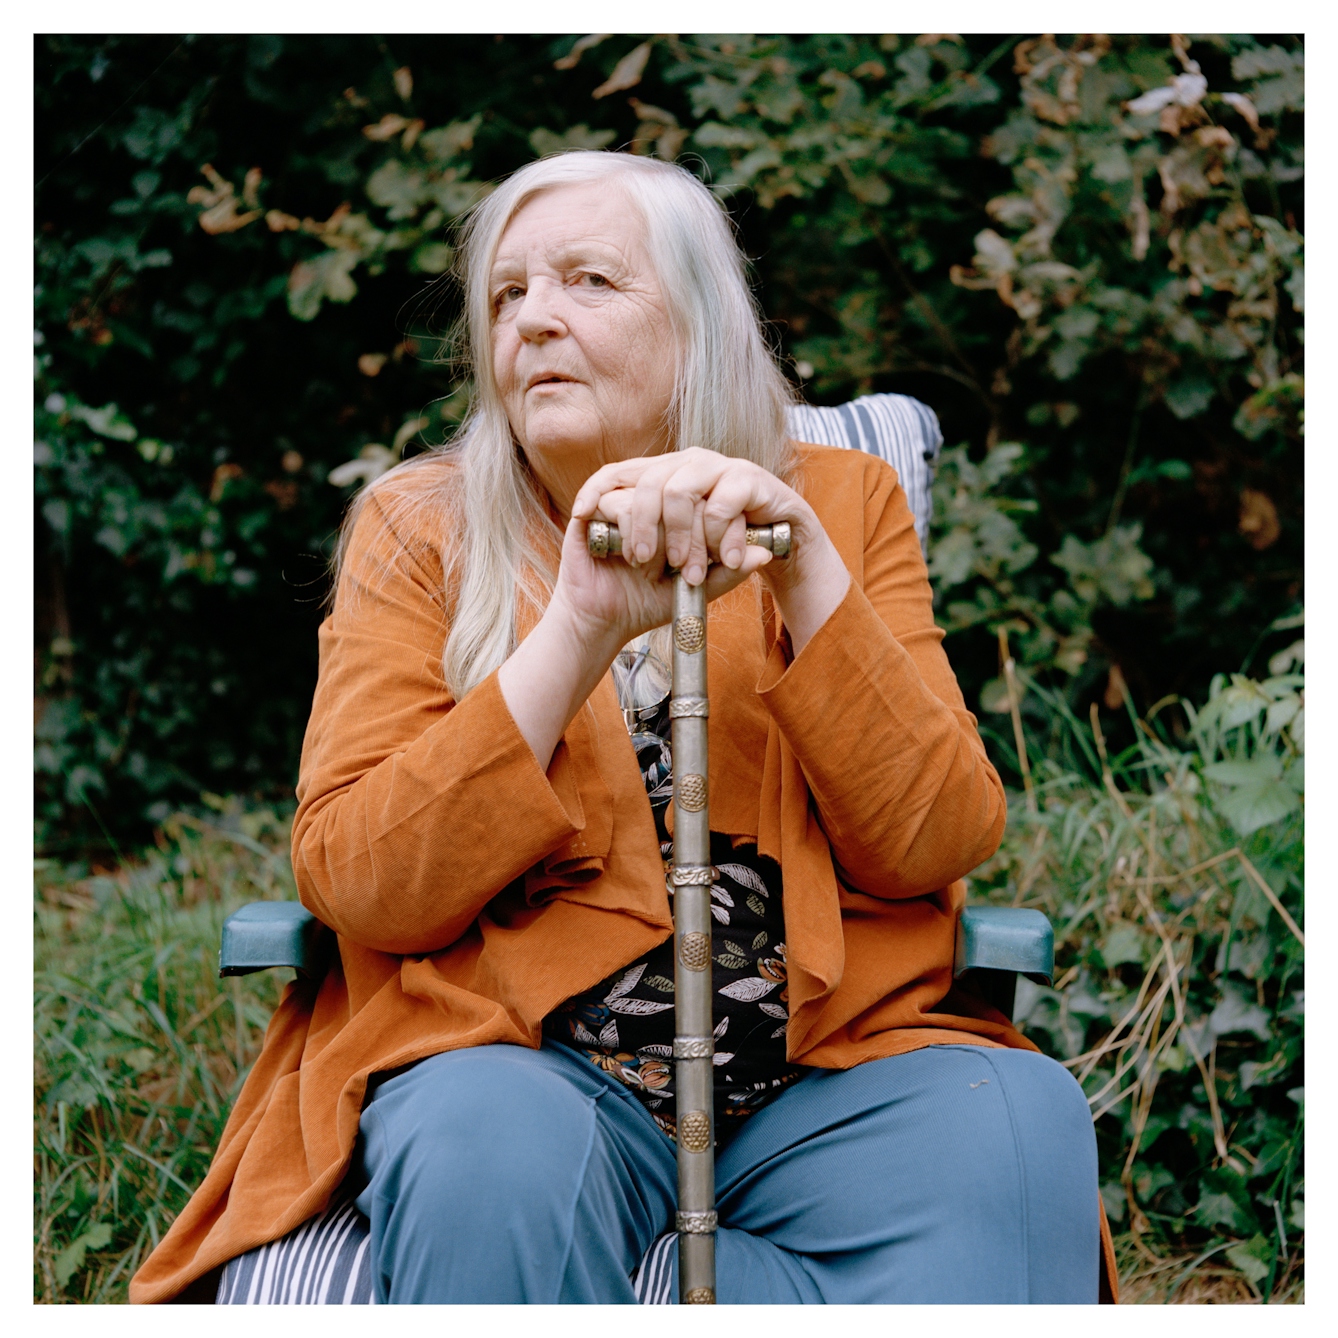 Portrait photograph of Alison, a woman with long grey hair, sitting on a plastic garden chair. Her hands are both resting on a silver walking stick, one hand stacked on top of the other. She is wearing blue trousers, a patterned top and an orange jacket. She has a neutral expression and is looking at the camera. Behind her are are some trees and small plants. 